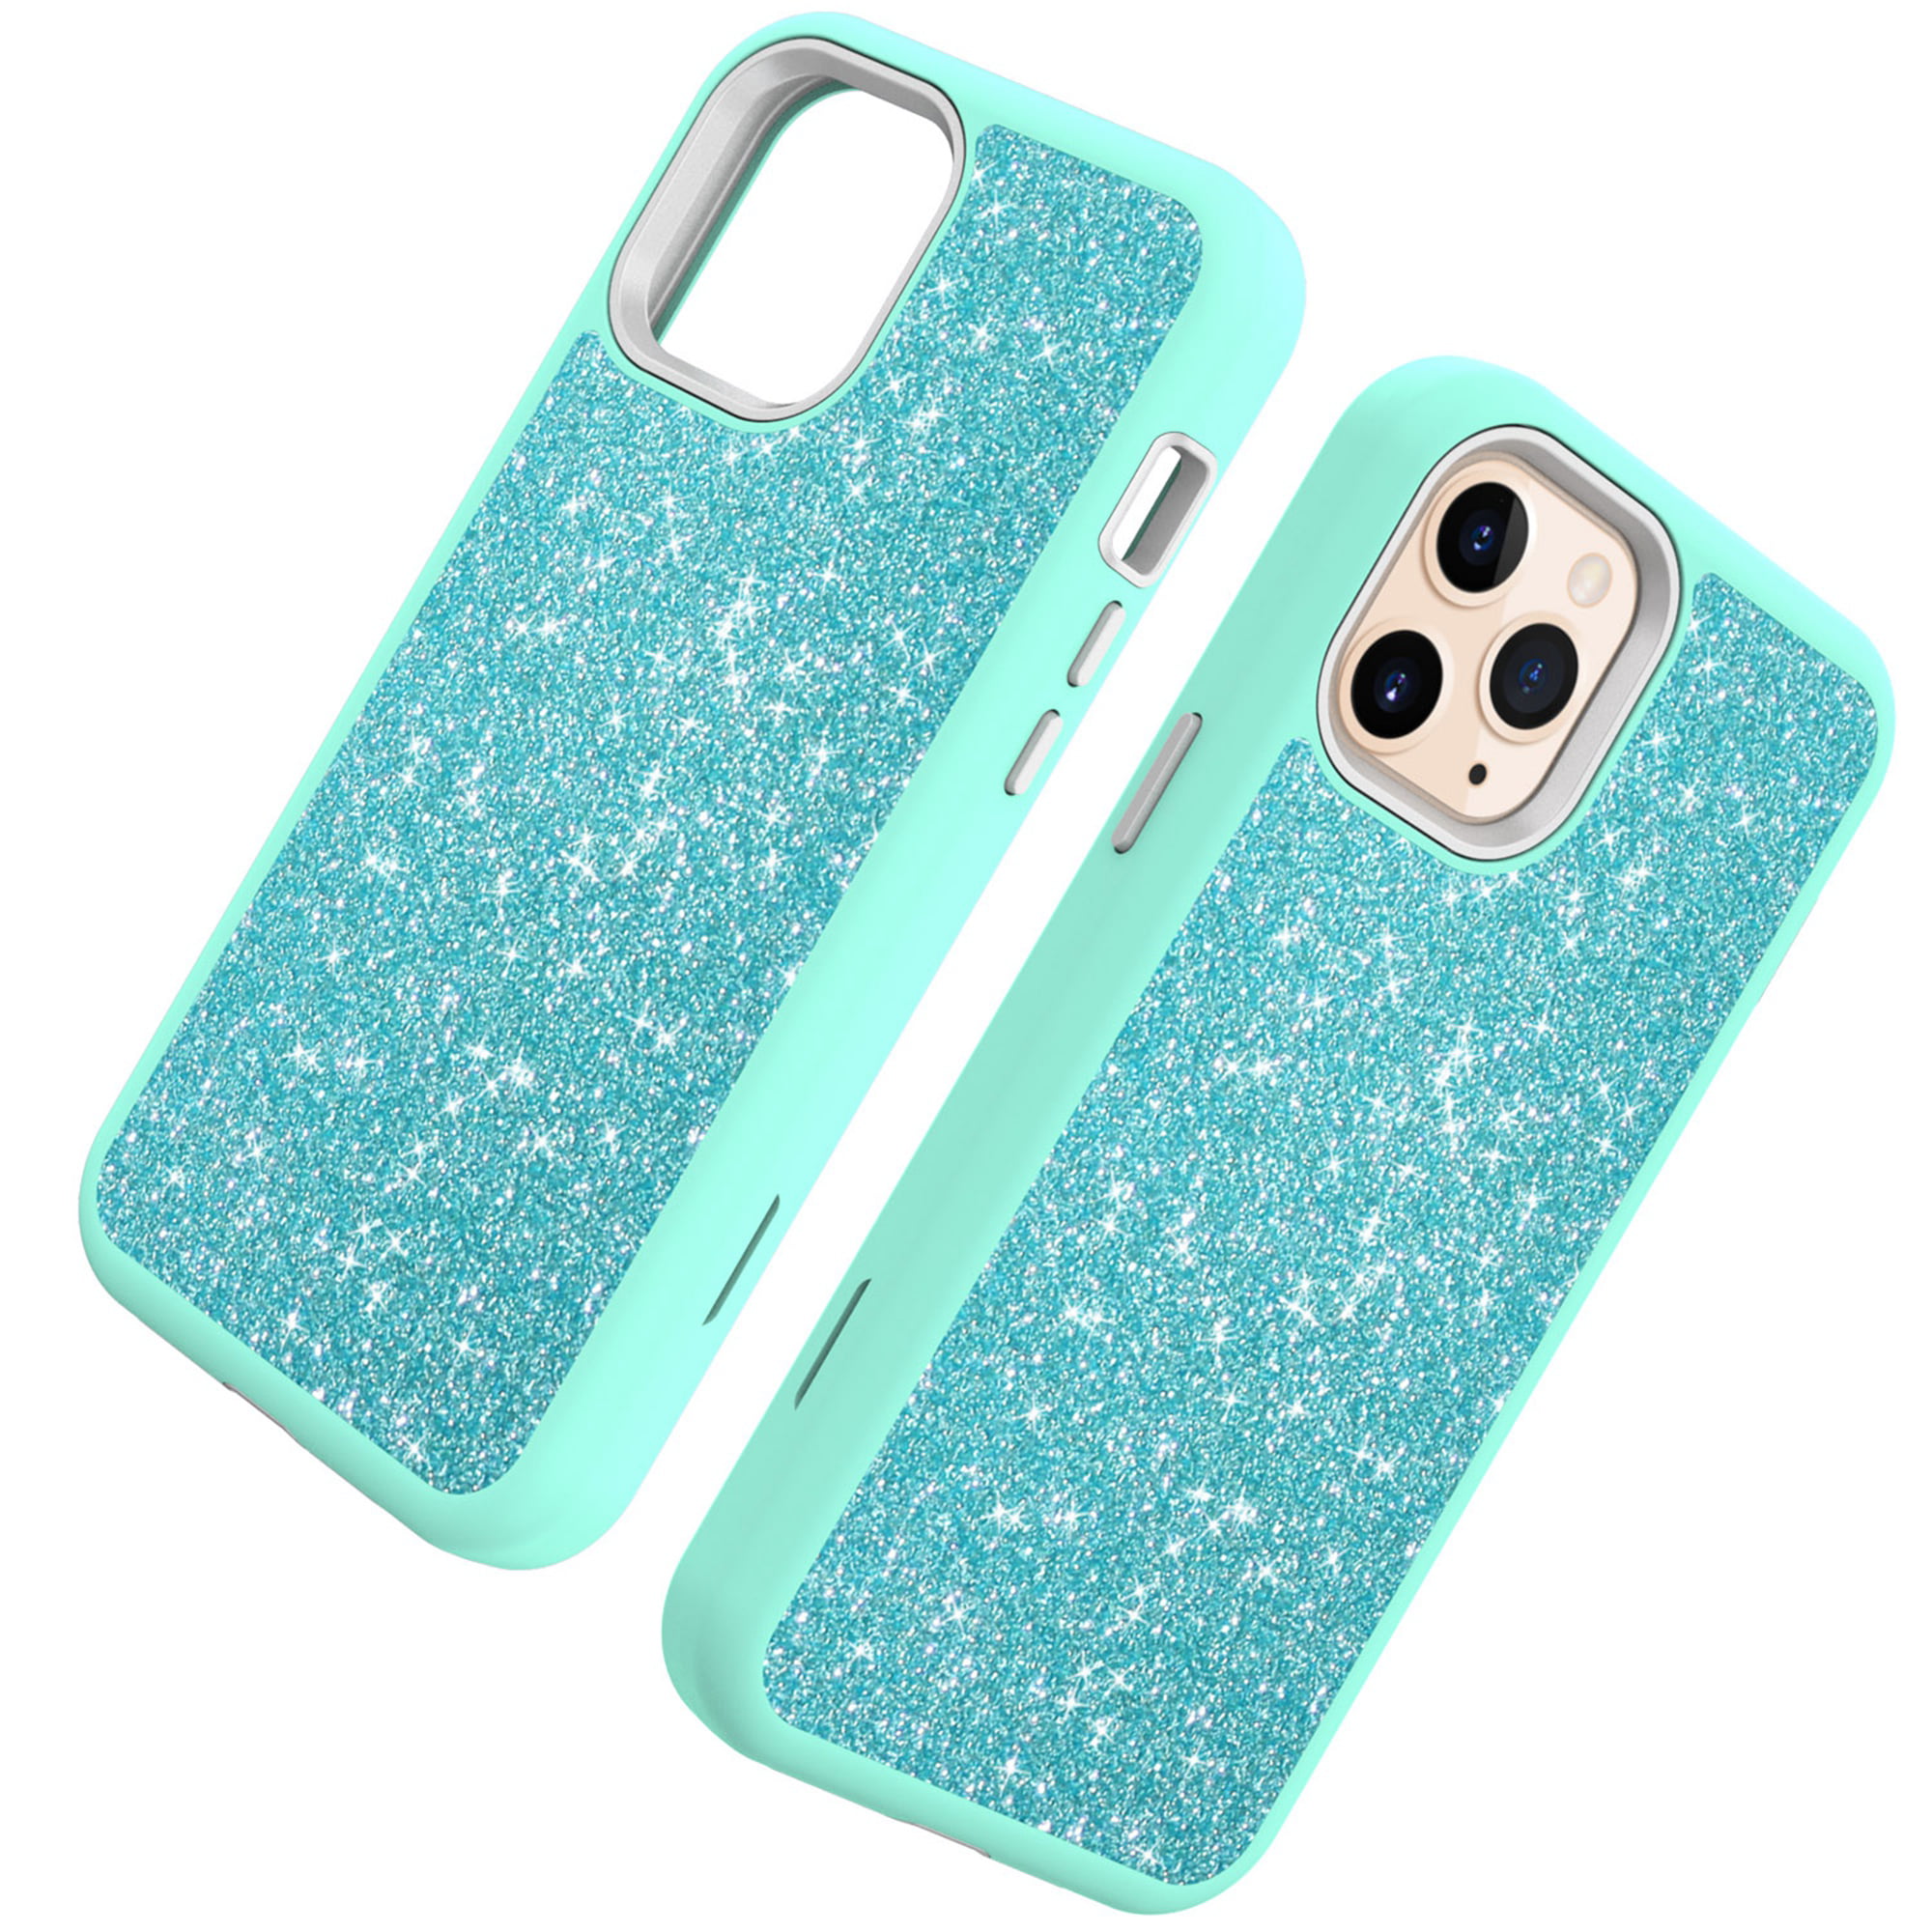  LXXZBC for iPhone 12 Pro Max 6.7 Bling Case,Luxury